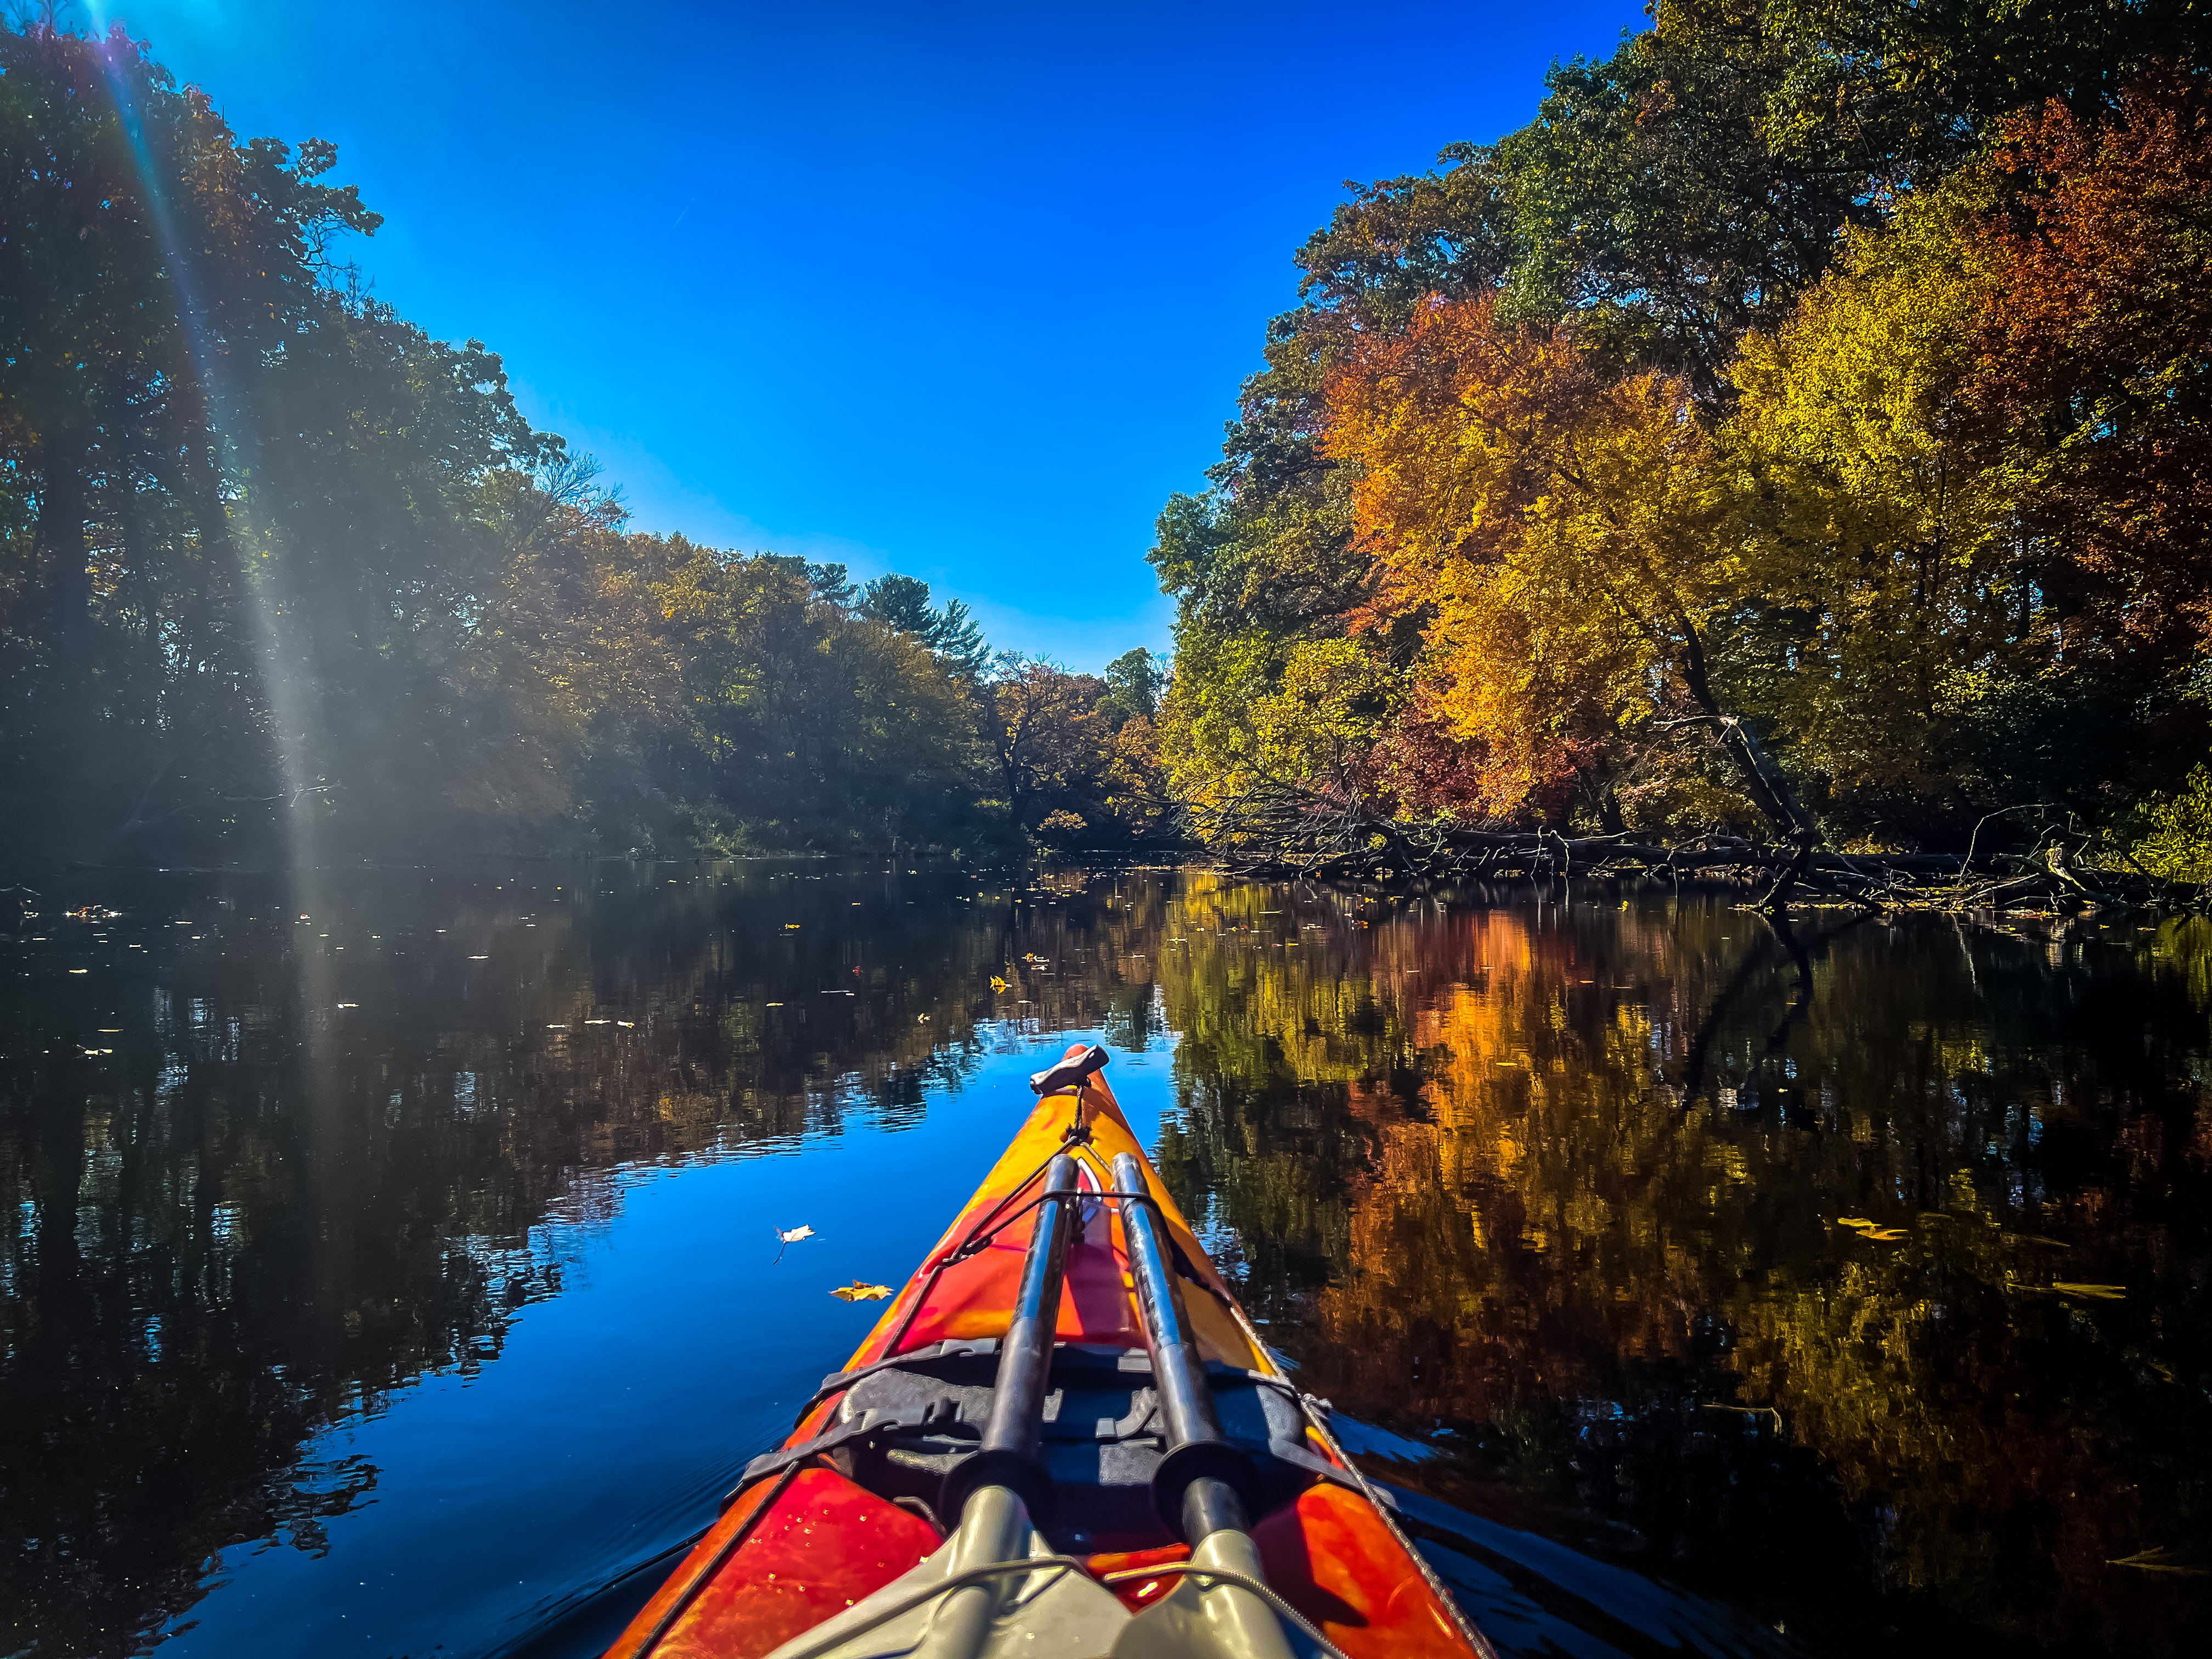 Fall scenery from the water